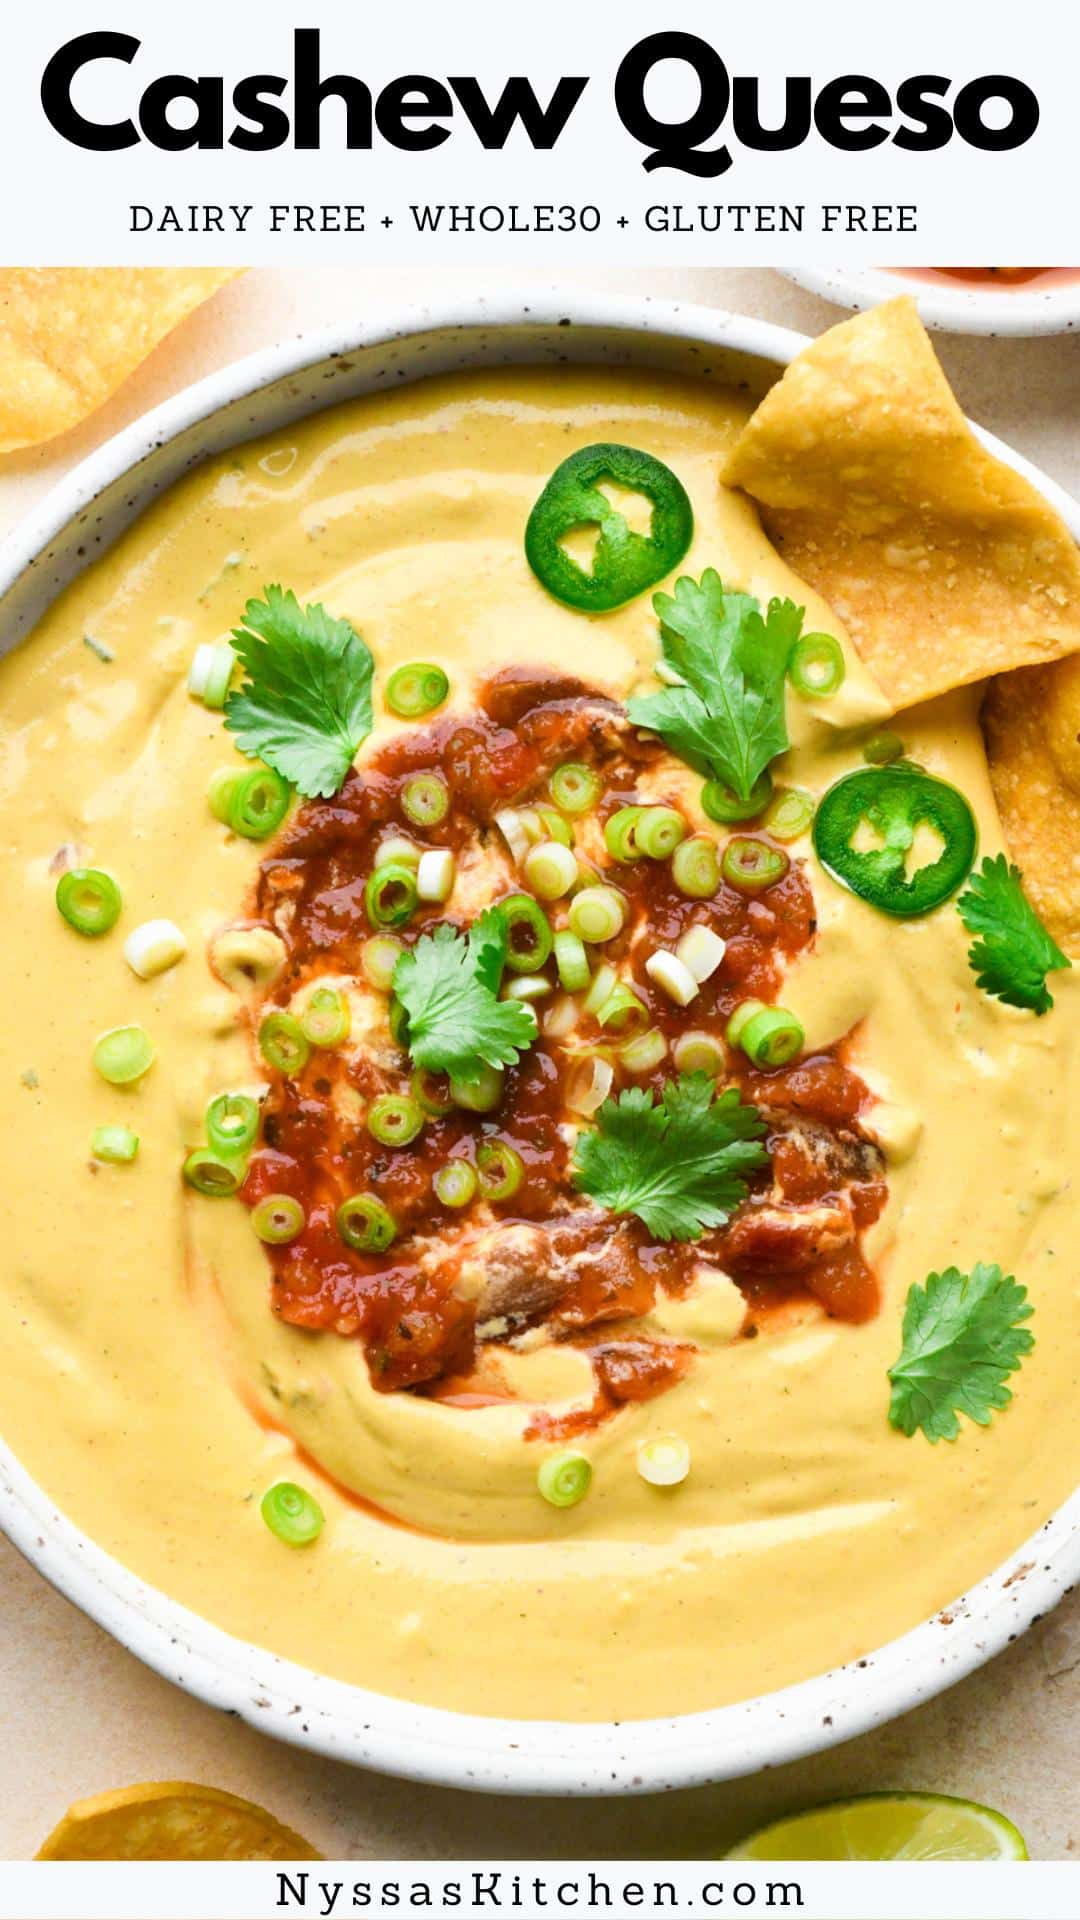 This creamy cashew queso is a delightful plant based recipe that tastes just as good as the real thing! Made with raw cashews, nutritional yeast, lime juice, and your favorite salsa. After soaking the cashews, it comes together in just 5 minutes and is delicious served warm with tortilla chips or as an addition to taco night. It is vegan, gluten free, Whole30 compatible, and paleo friendly, too!